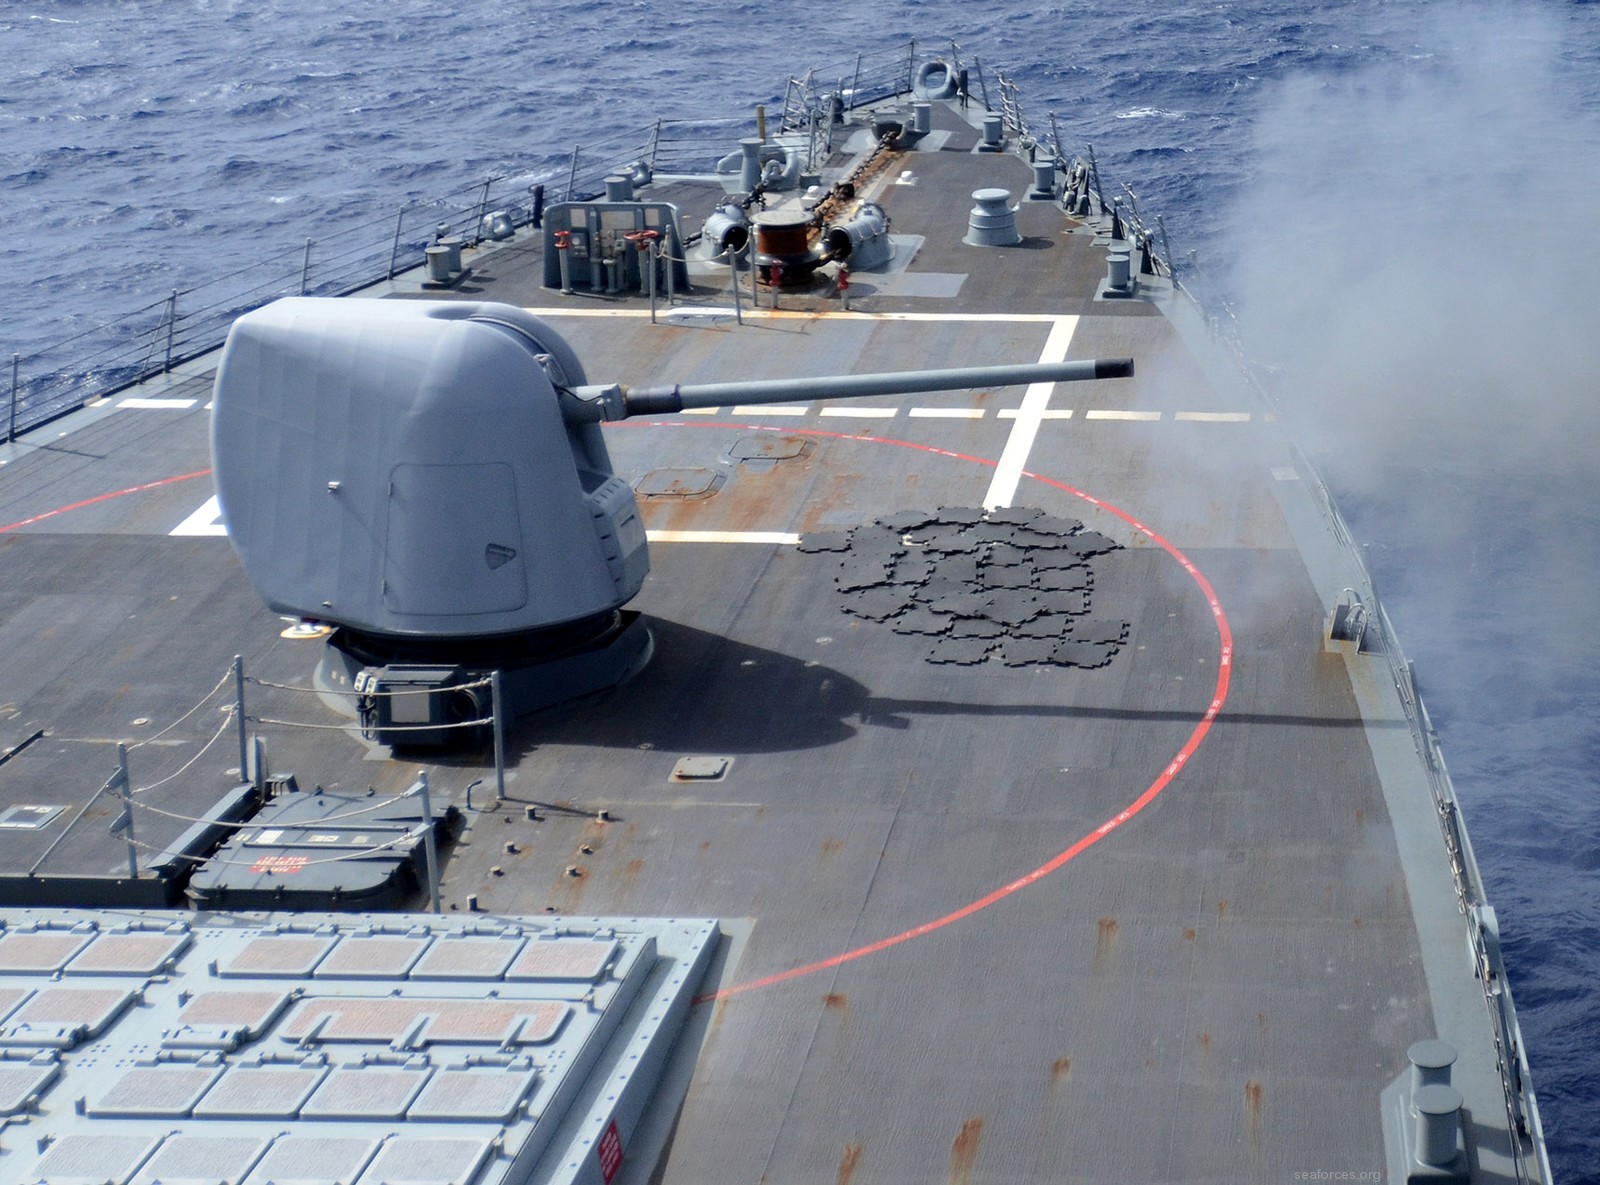 ddg-62 uss fitzgerald guided missile destroyer 2013 48 mk-45 5 inch 54 caliber gun fire exercise